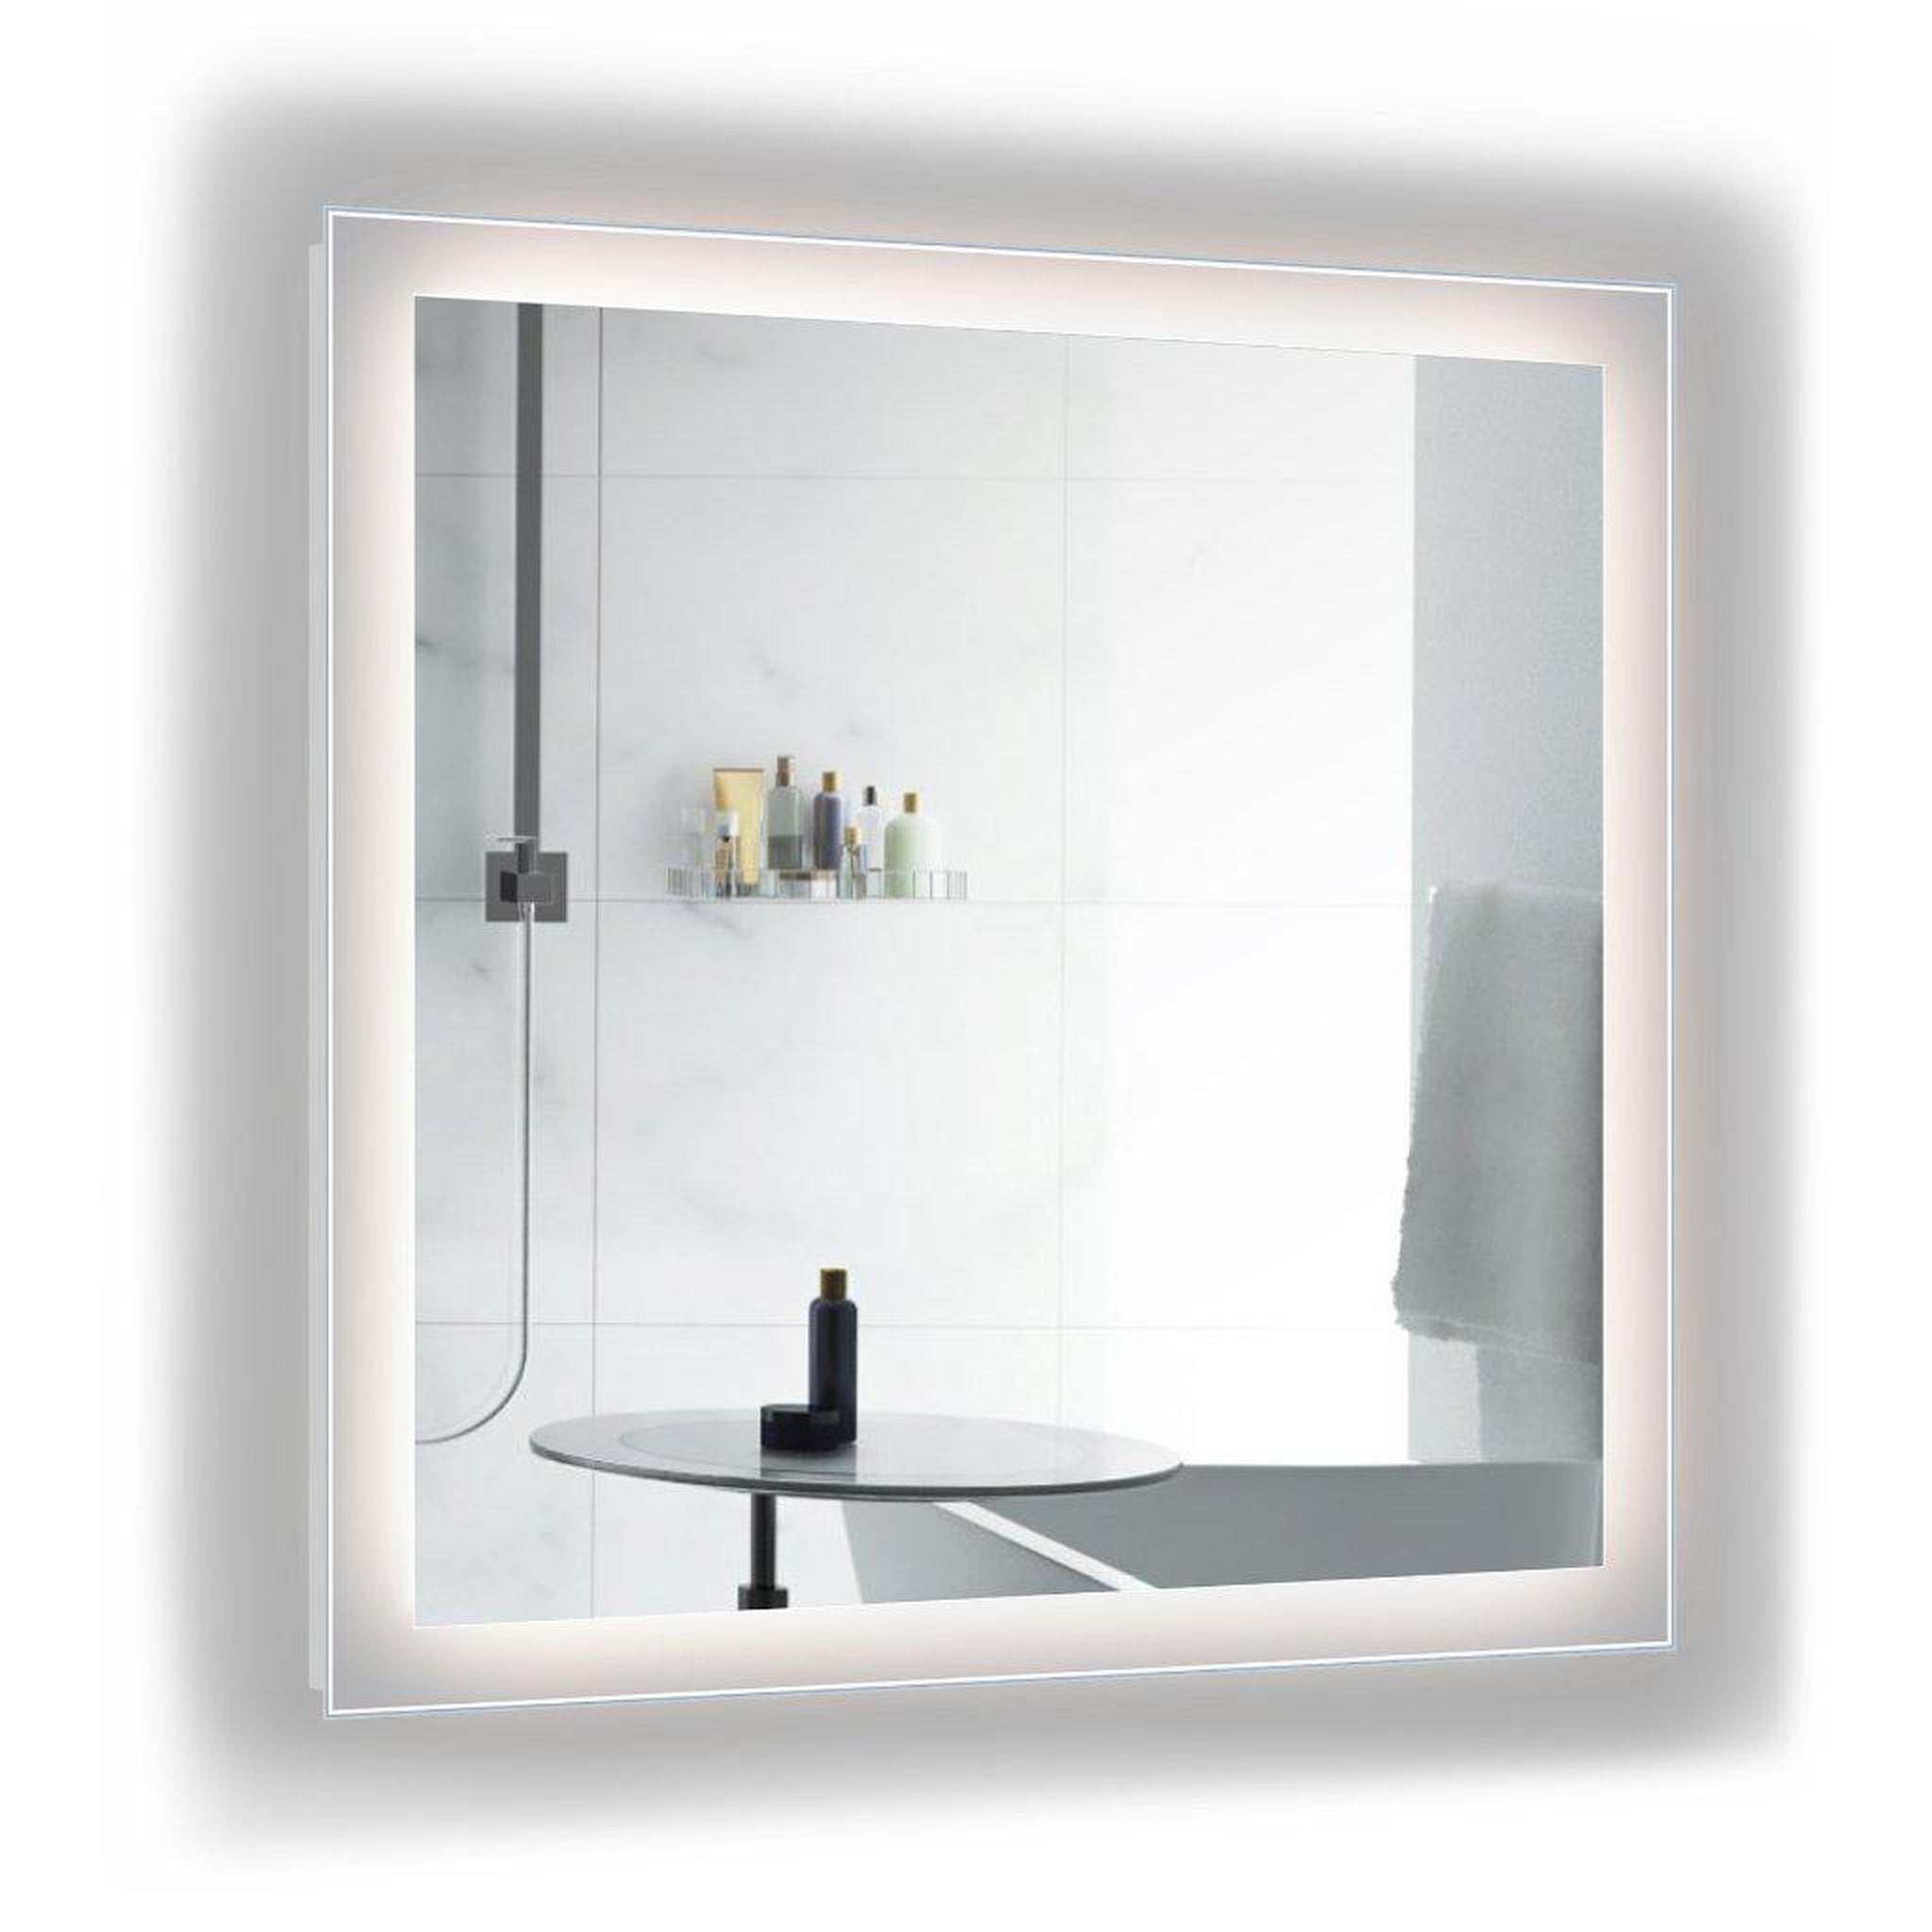 Krugg Reflections, Krugg Reflections Stella 36" x 36" 5000K Square Wall-Mounted Silver-Backed LED Bathroom Vanity Mirror With Built-in Defogger and Dimmer